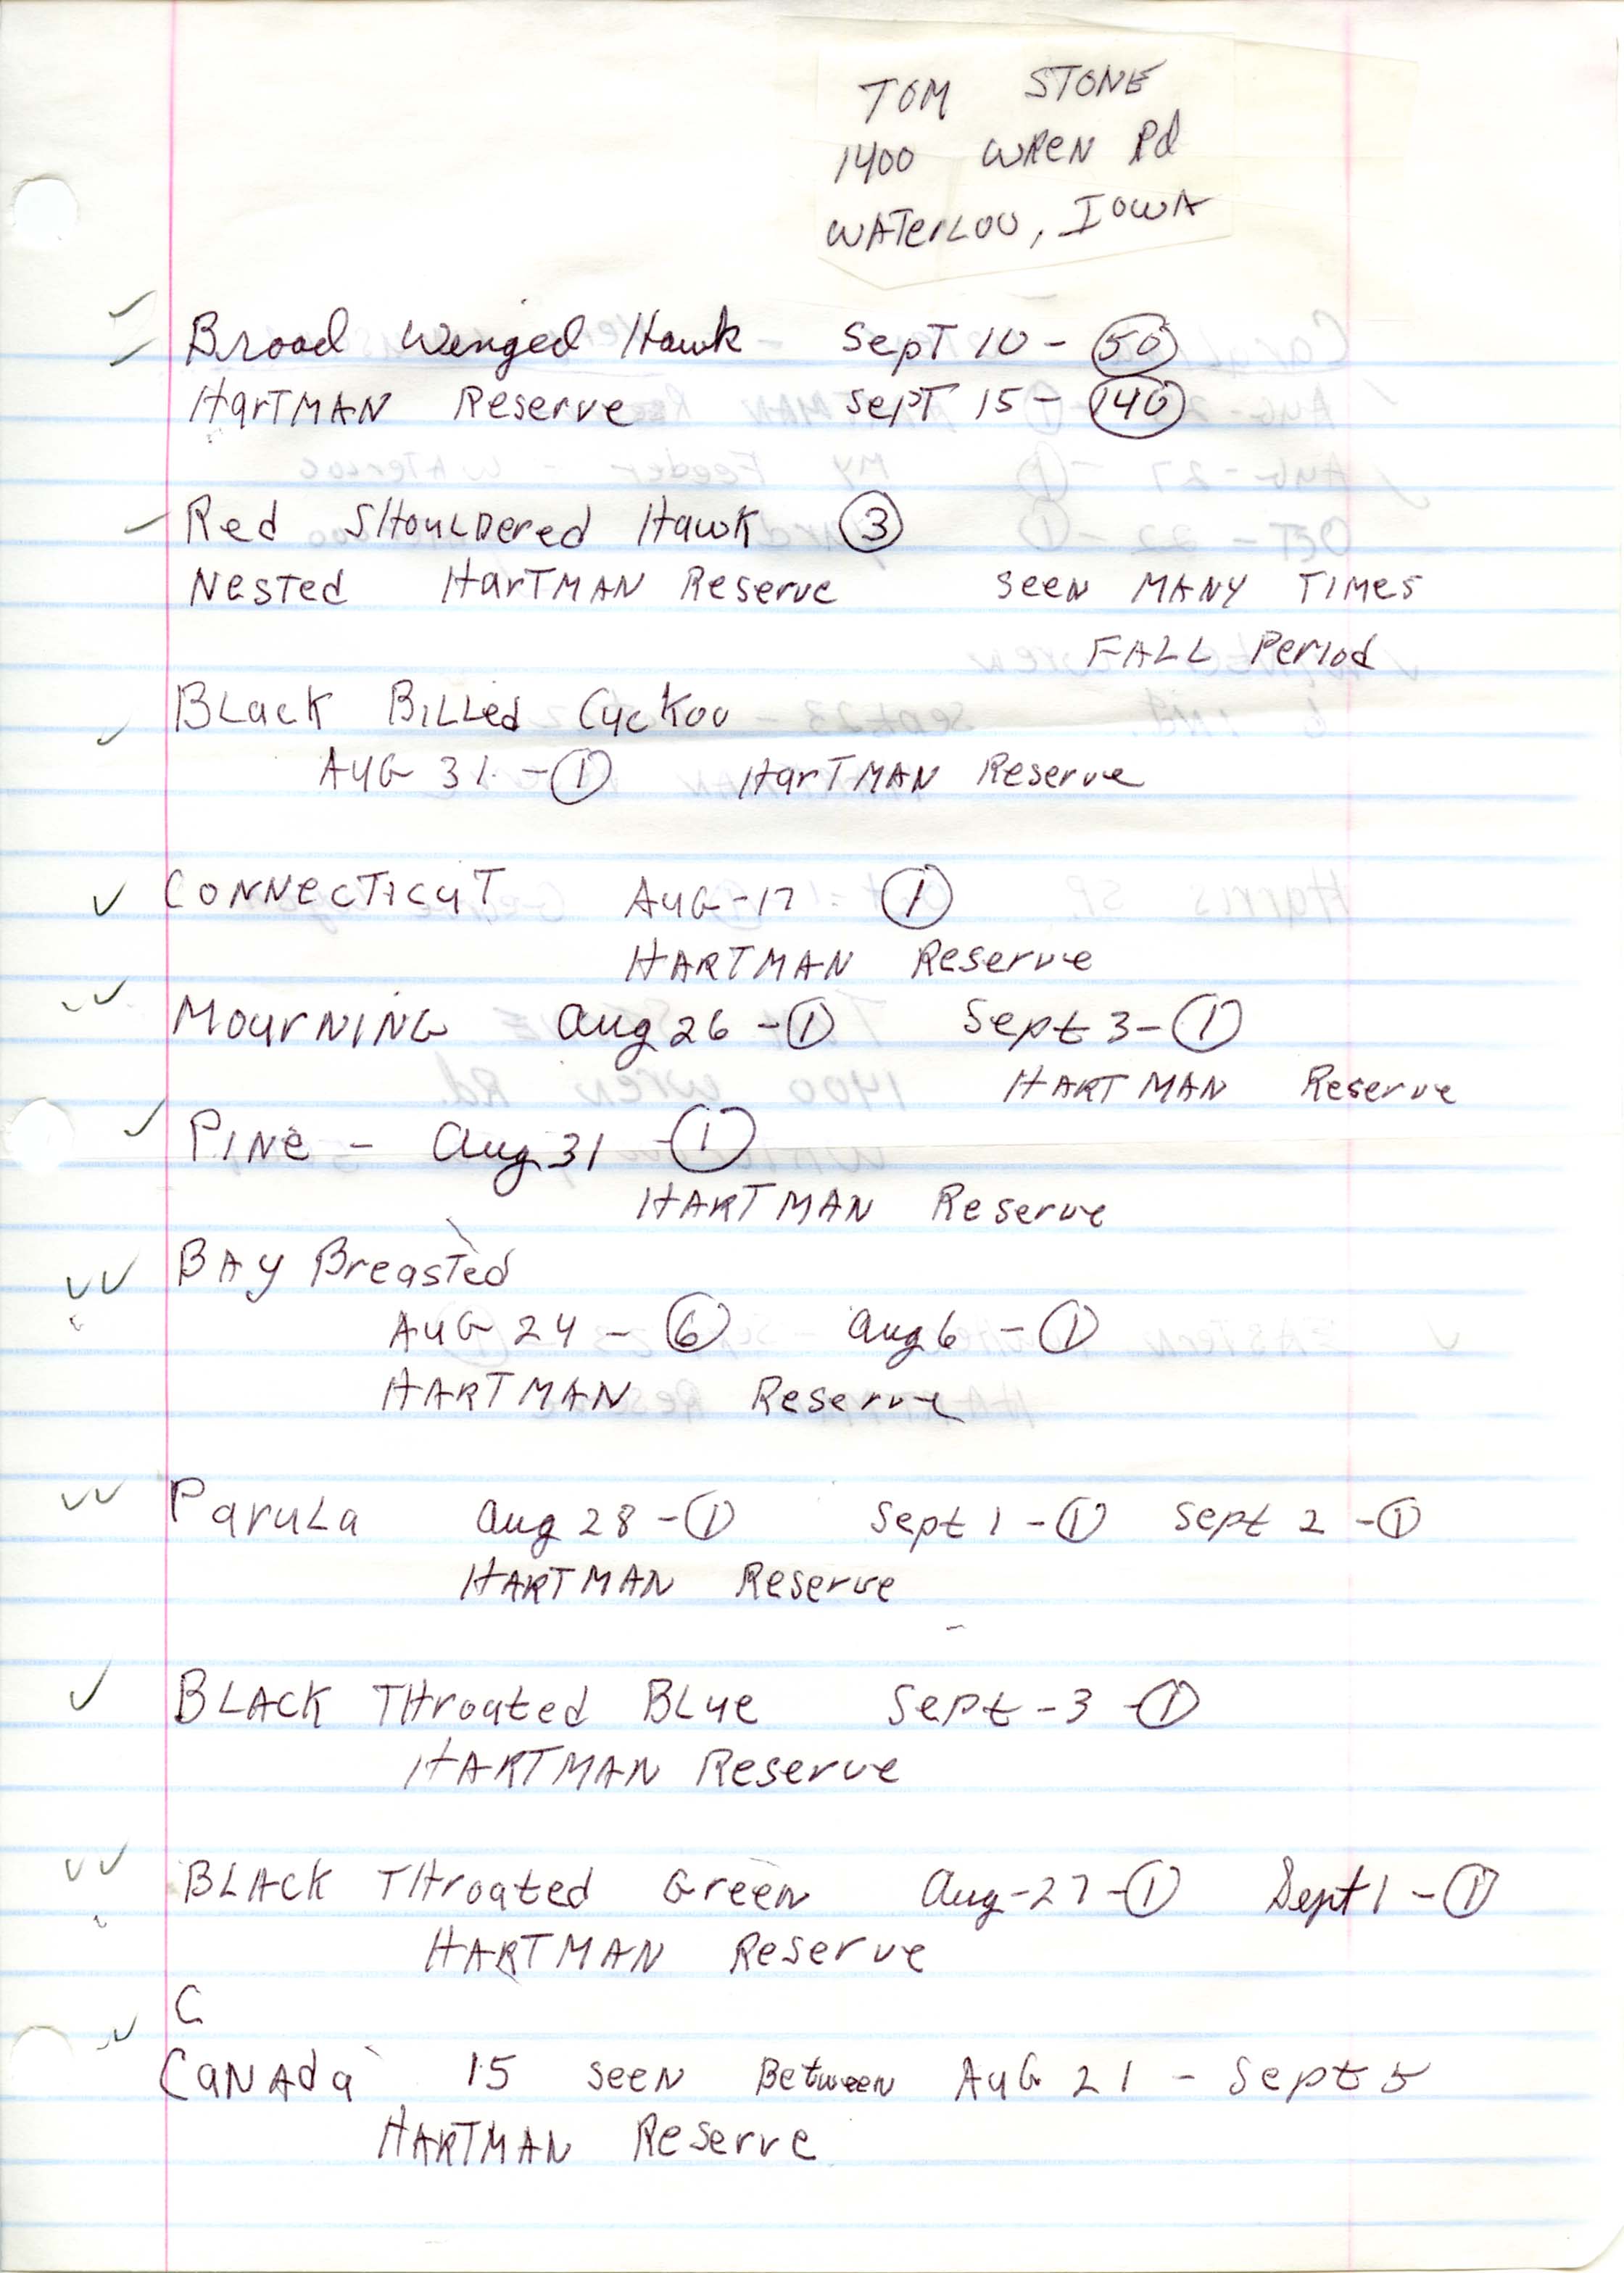 Field notes contributed by Tom Stone, fall 1998